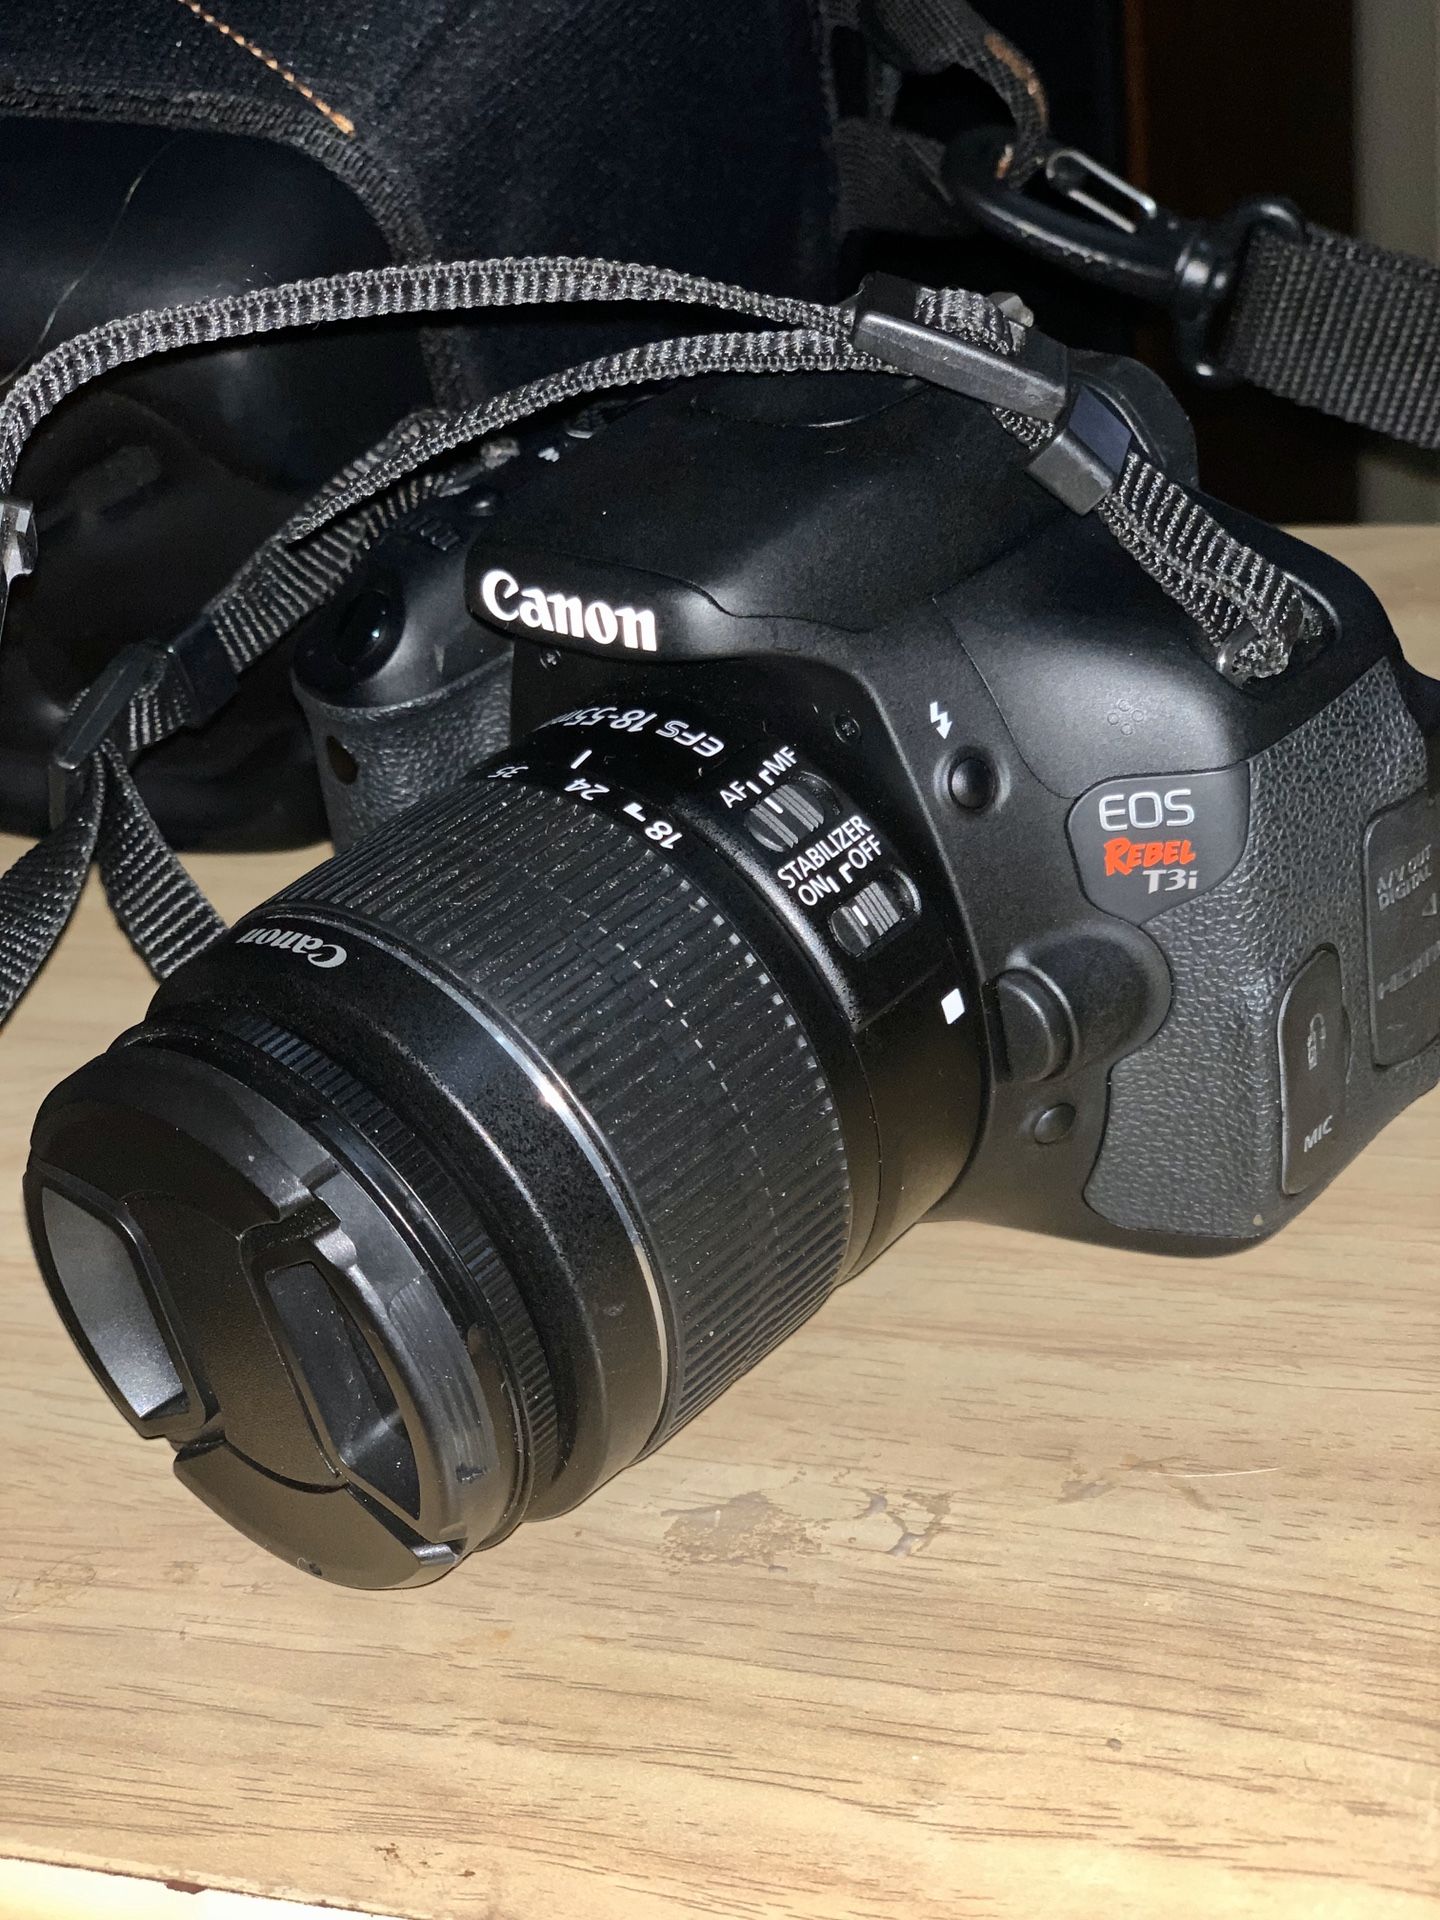 Canon EOS T3i DSLR camera with extras.